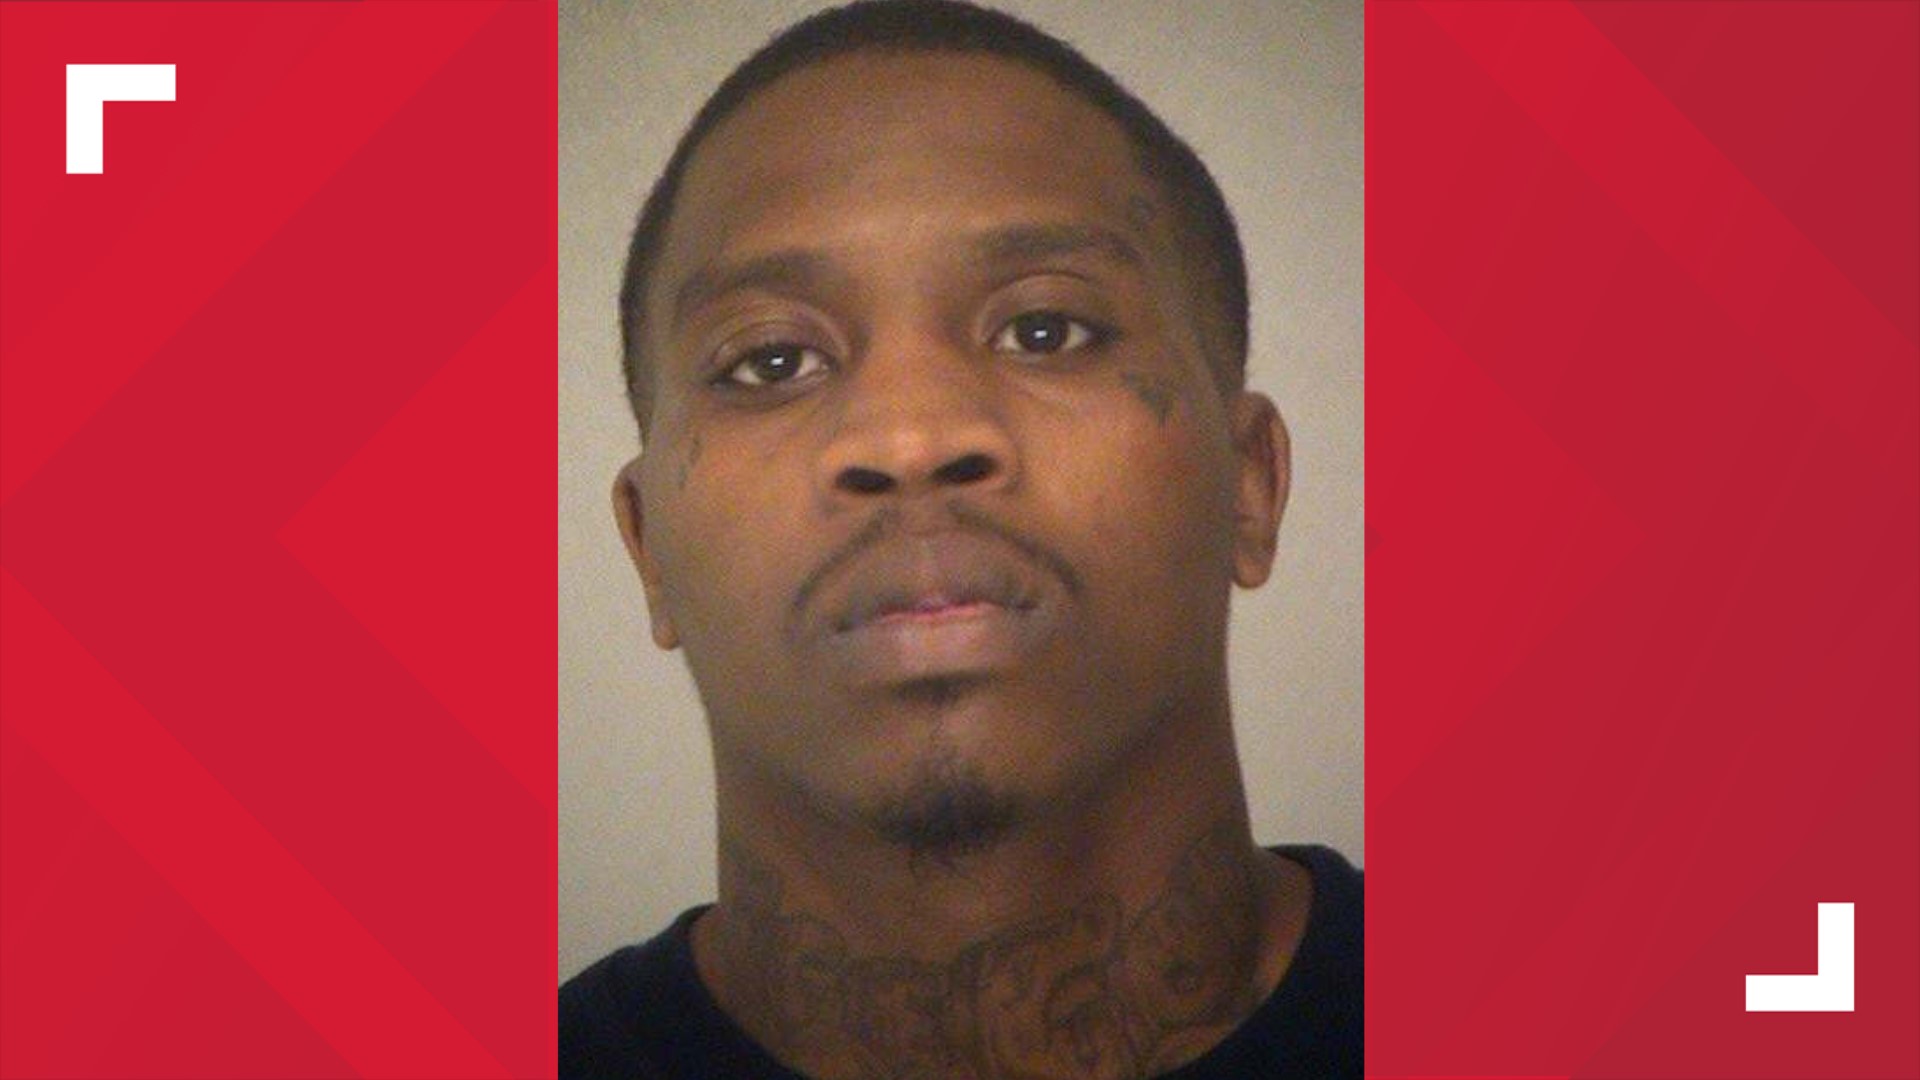 The Bibb County Sheriff's Office says they're looking for 28-year-old Fred Harris after he allegedly robbed a Family Dollar.